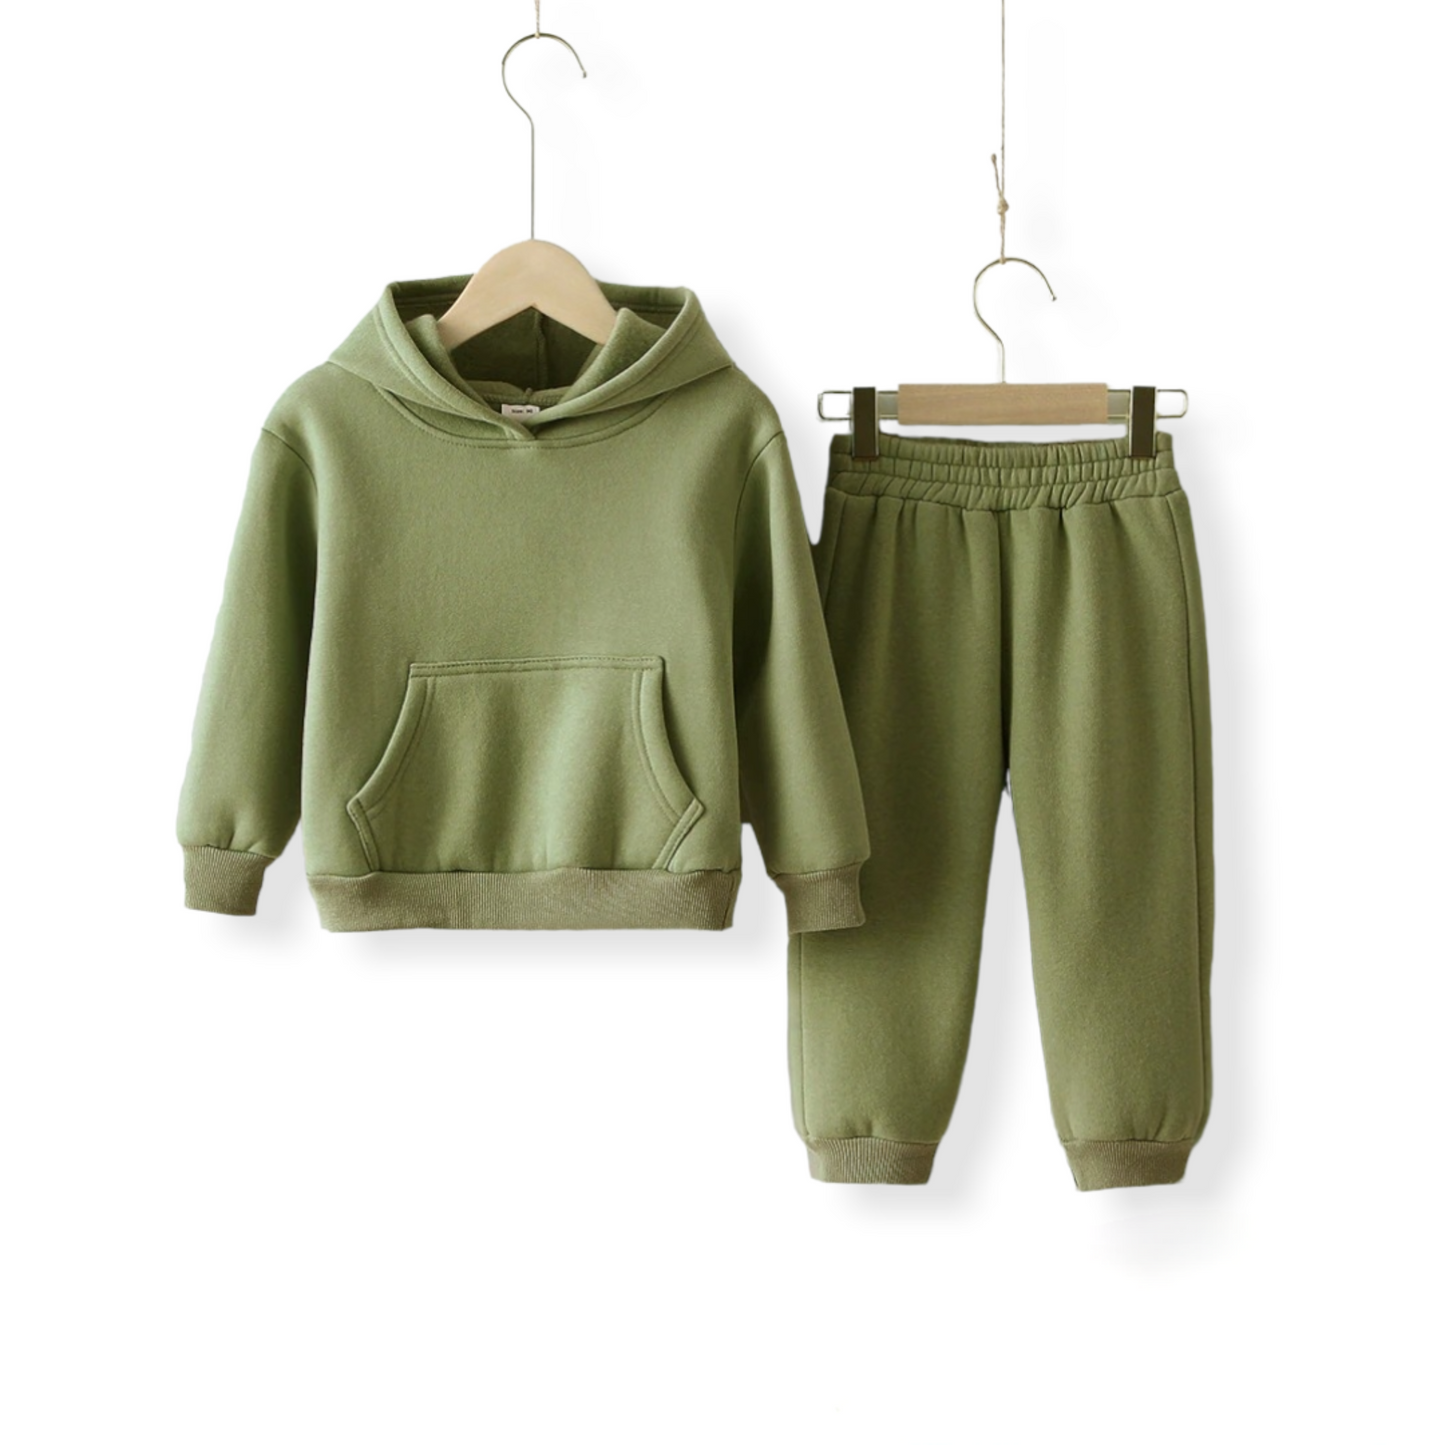 A matcha green warm unisex tracksuit for kids and toddlers hung on a hanger against a white wall from hunny bubba kids